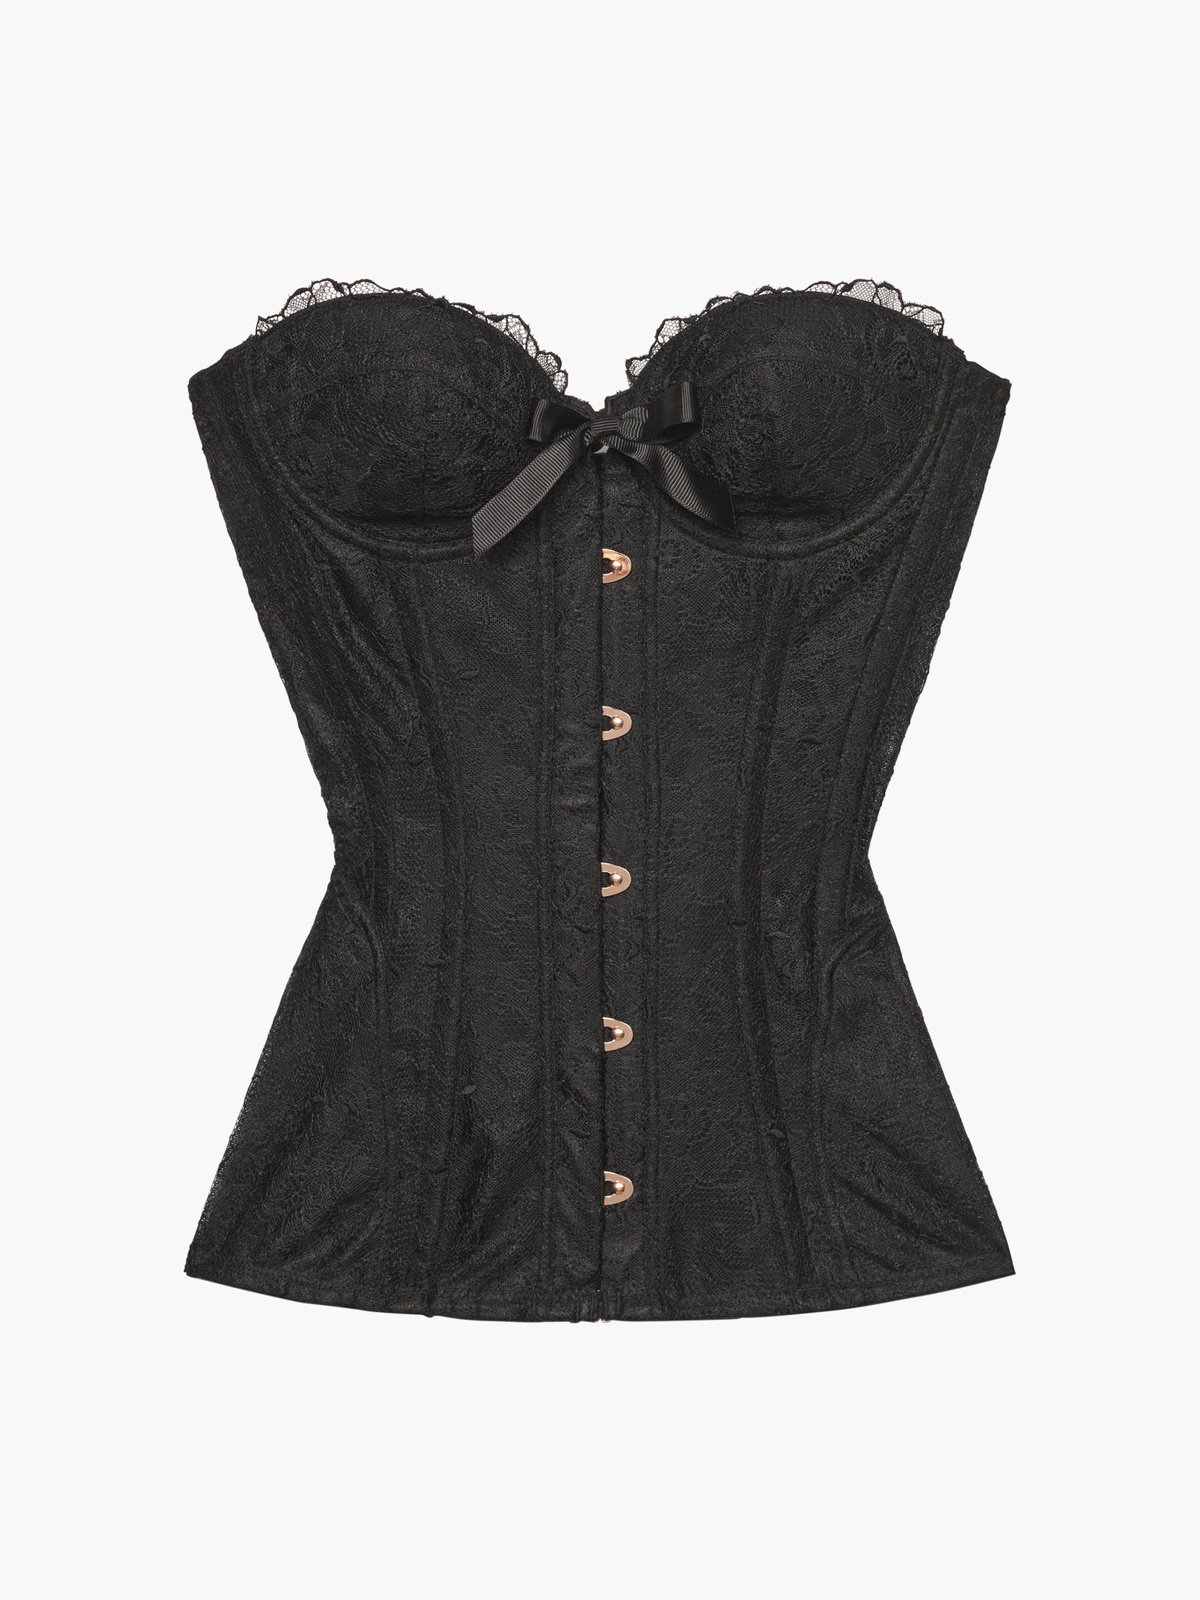 Embroidered Lace Corset